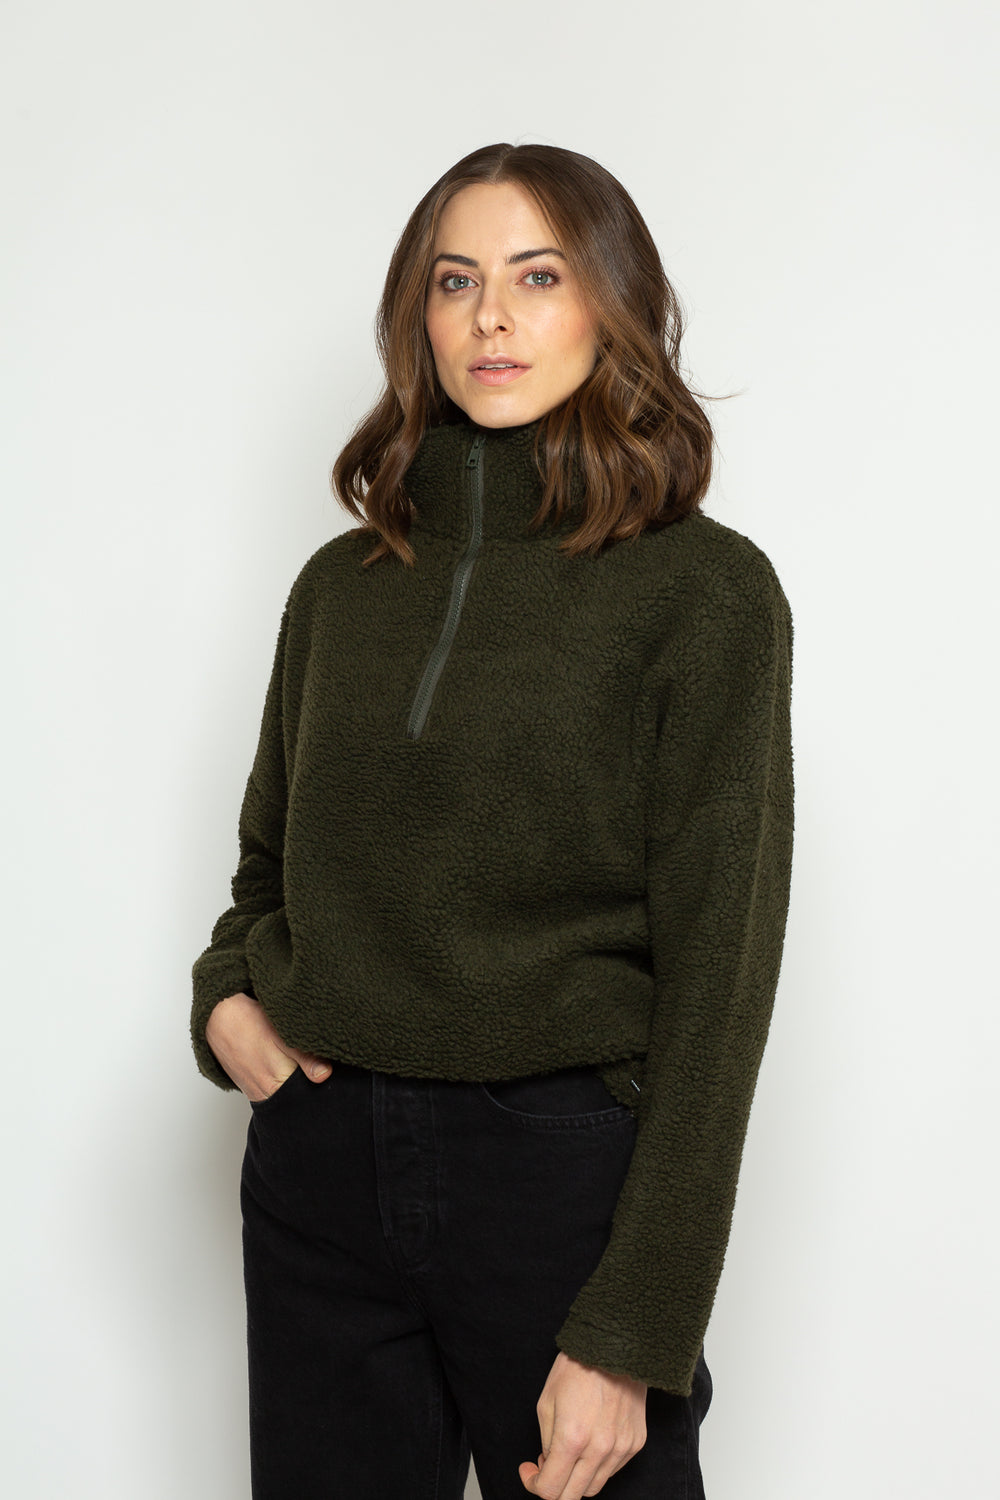 Woman wearing the Nela Zip-neck Sweater sewing pattern from Bara Studio on The Fold Line. A sweater pattern made in fleece, plush, teddy or heavy knit fabrics, featuring a full length sleeve, high neck, front zip opening, adjustable elasticated hem with t